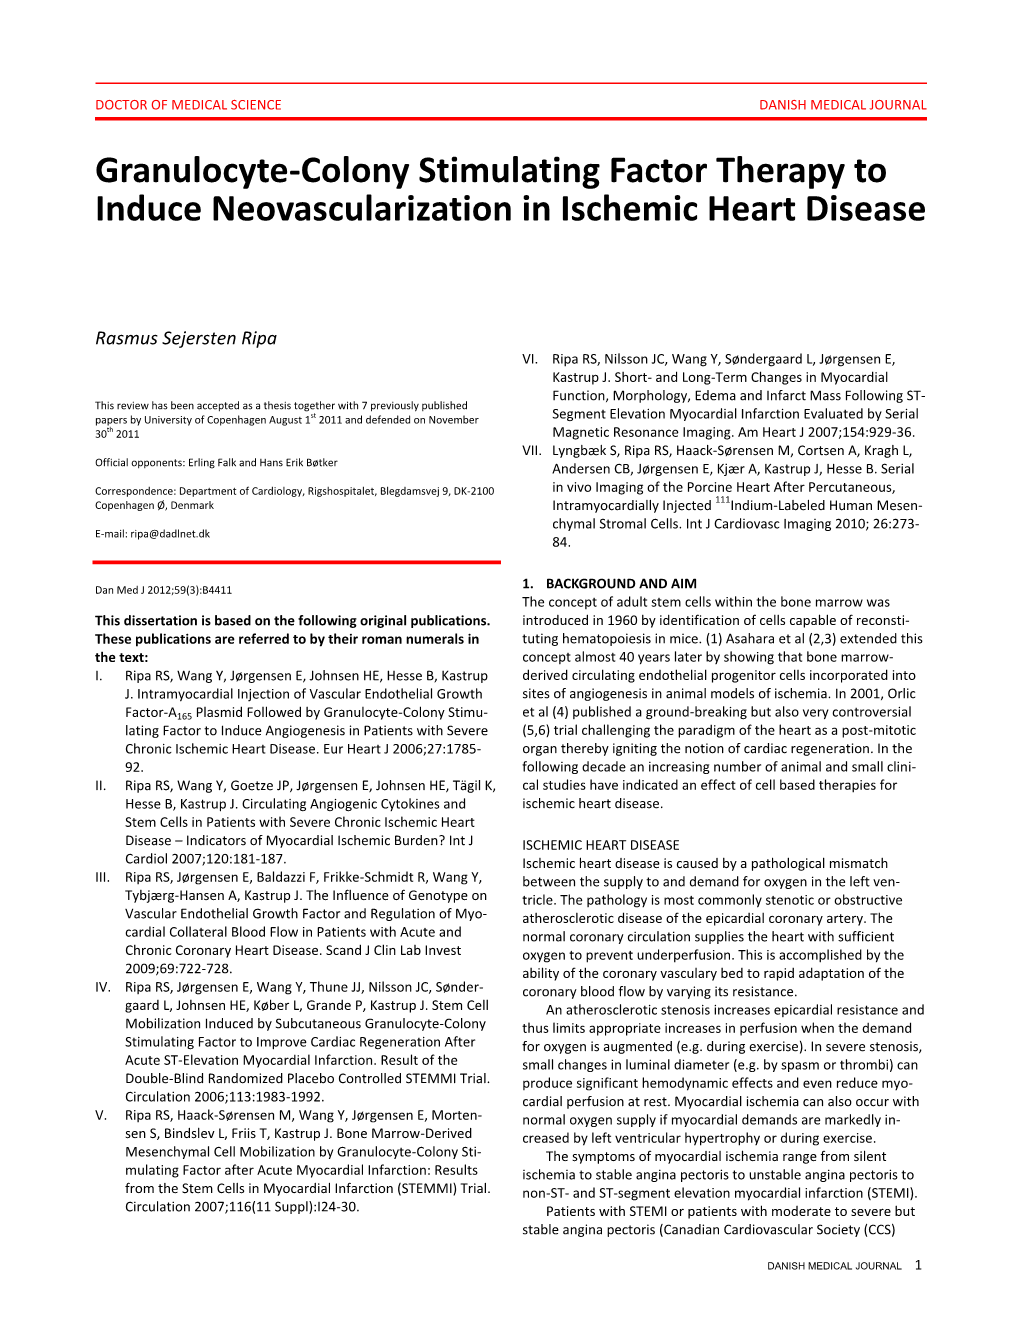 Granulocyte-Colony Stimulating Factor Therapy to Induce Neovascularization in Ischemic Heart Disease